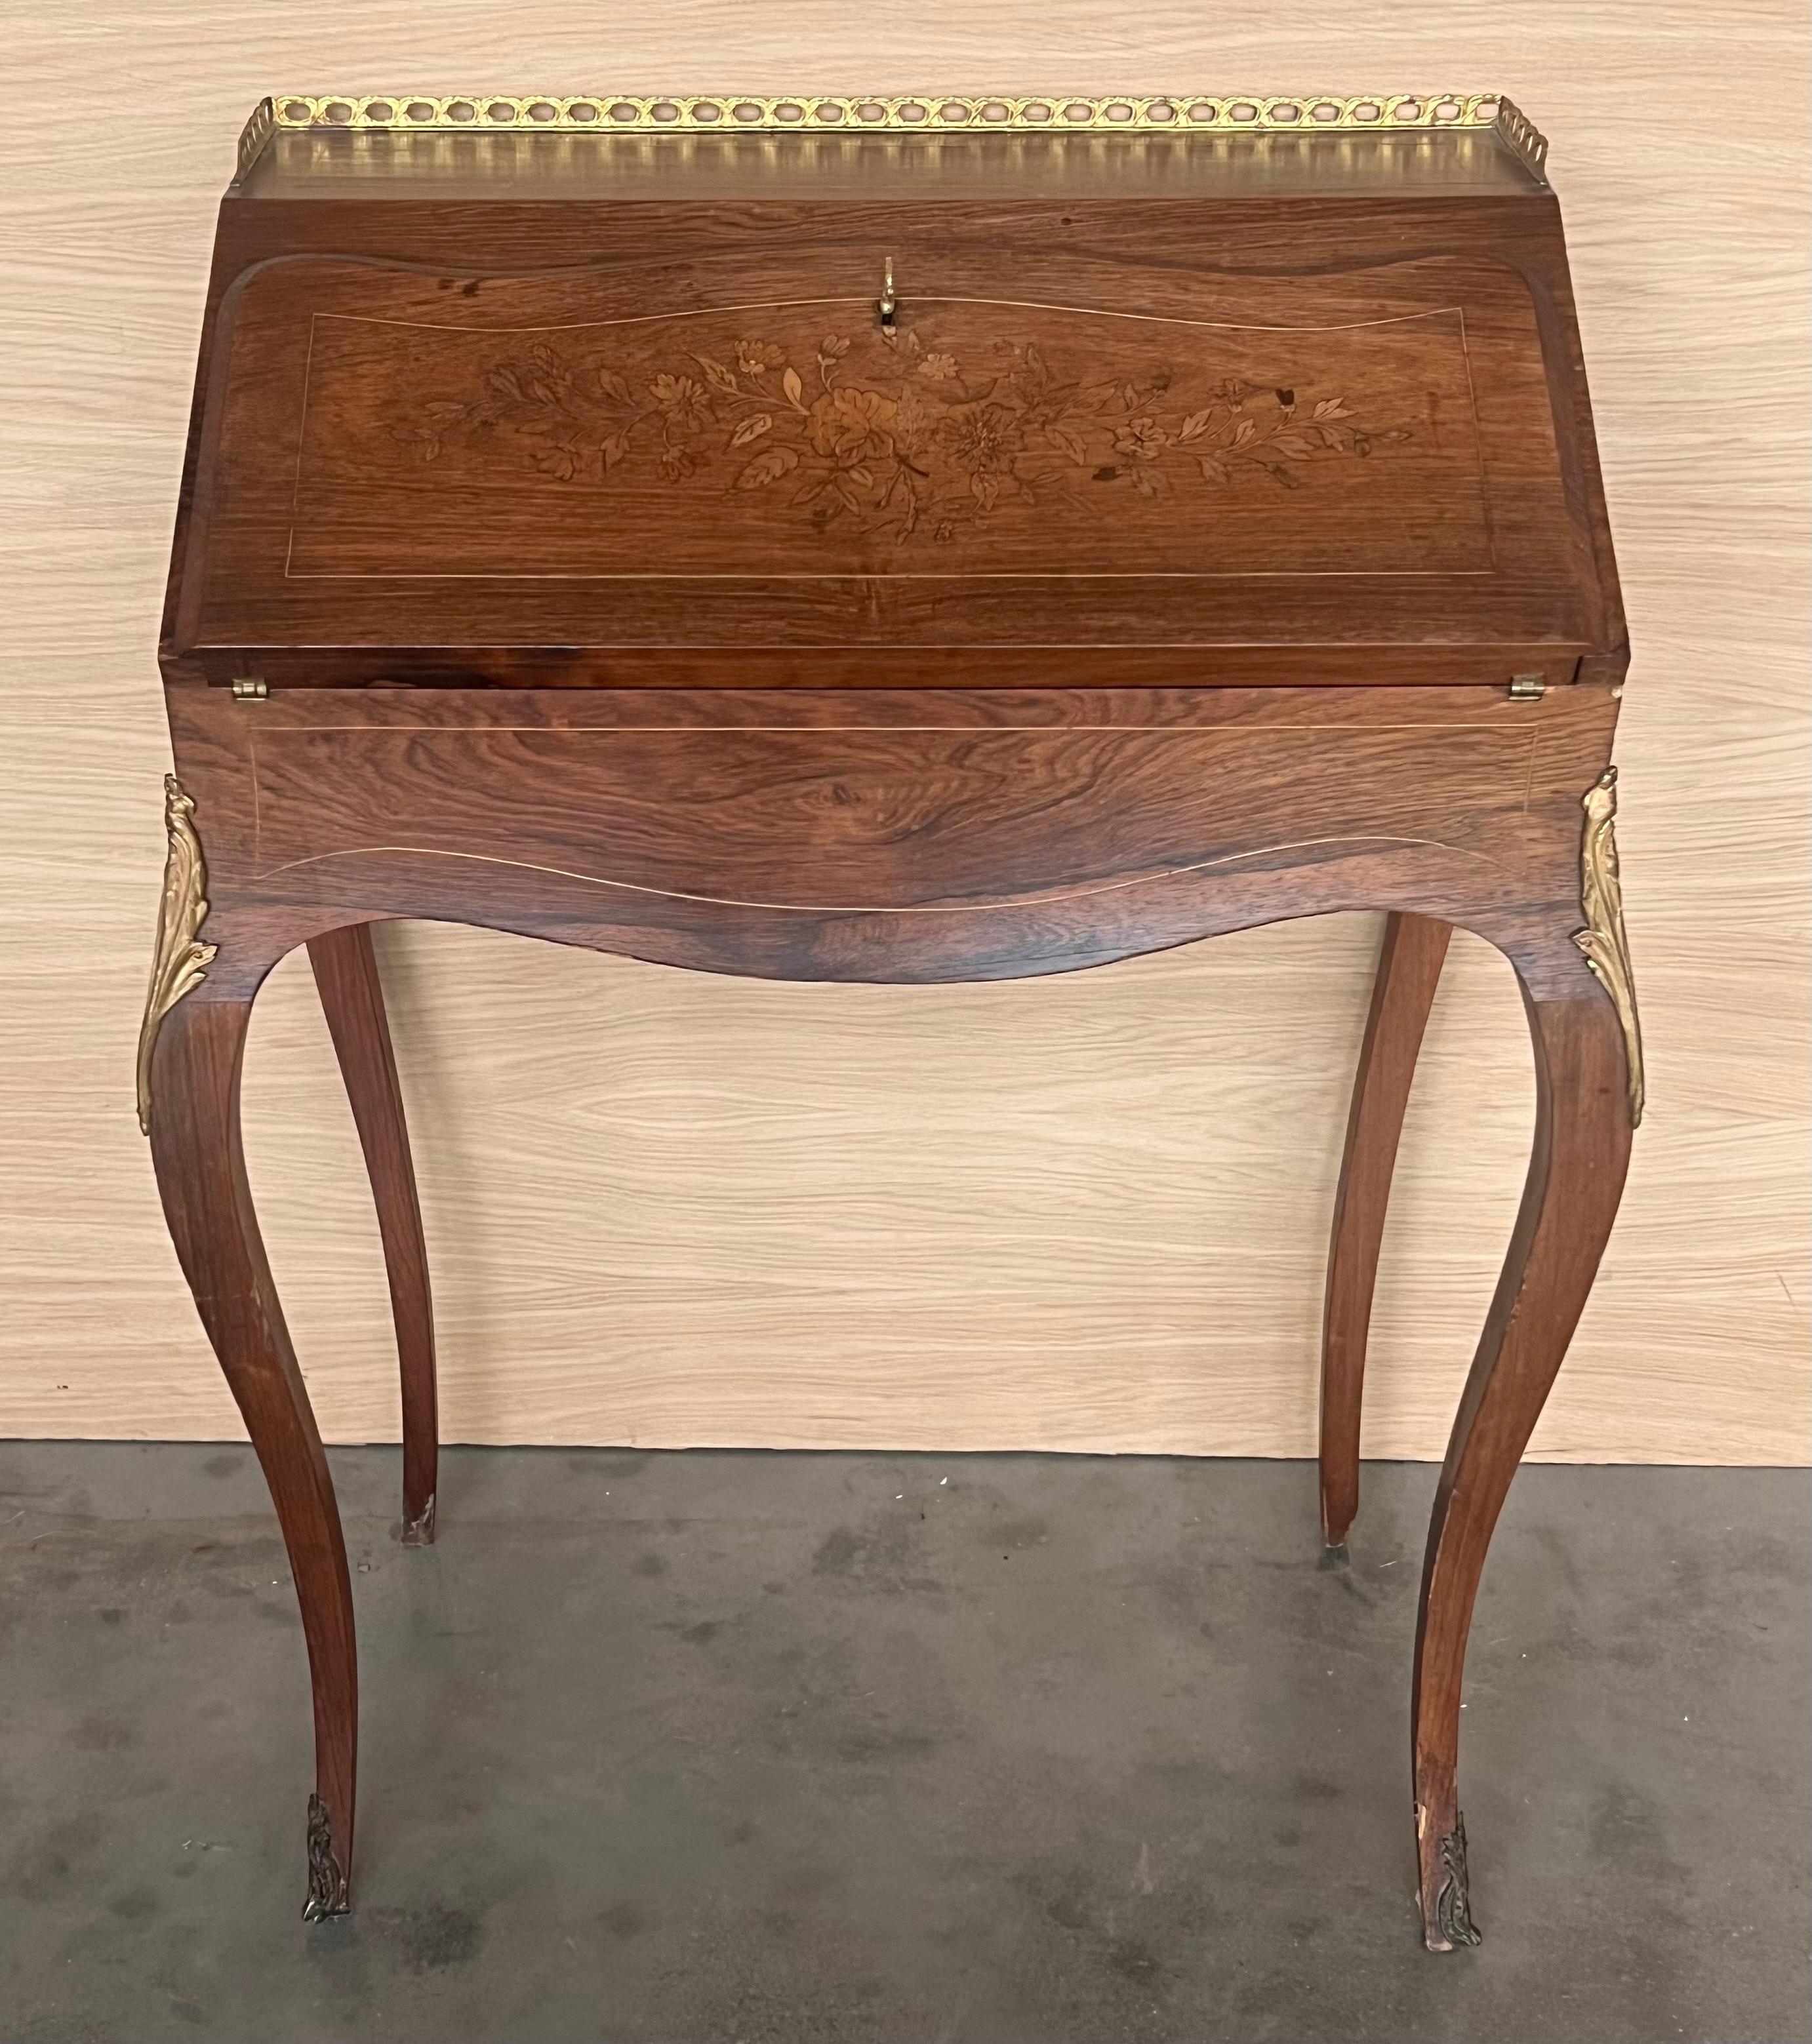 An antique early 20th century ladies' secretary desk. Made from walnut with a maple writing surface. Features a drop front with neoclassical brass hardware over large central drawer with French pulls. Opens to two pigeonholes and an accessory